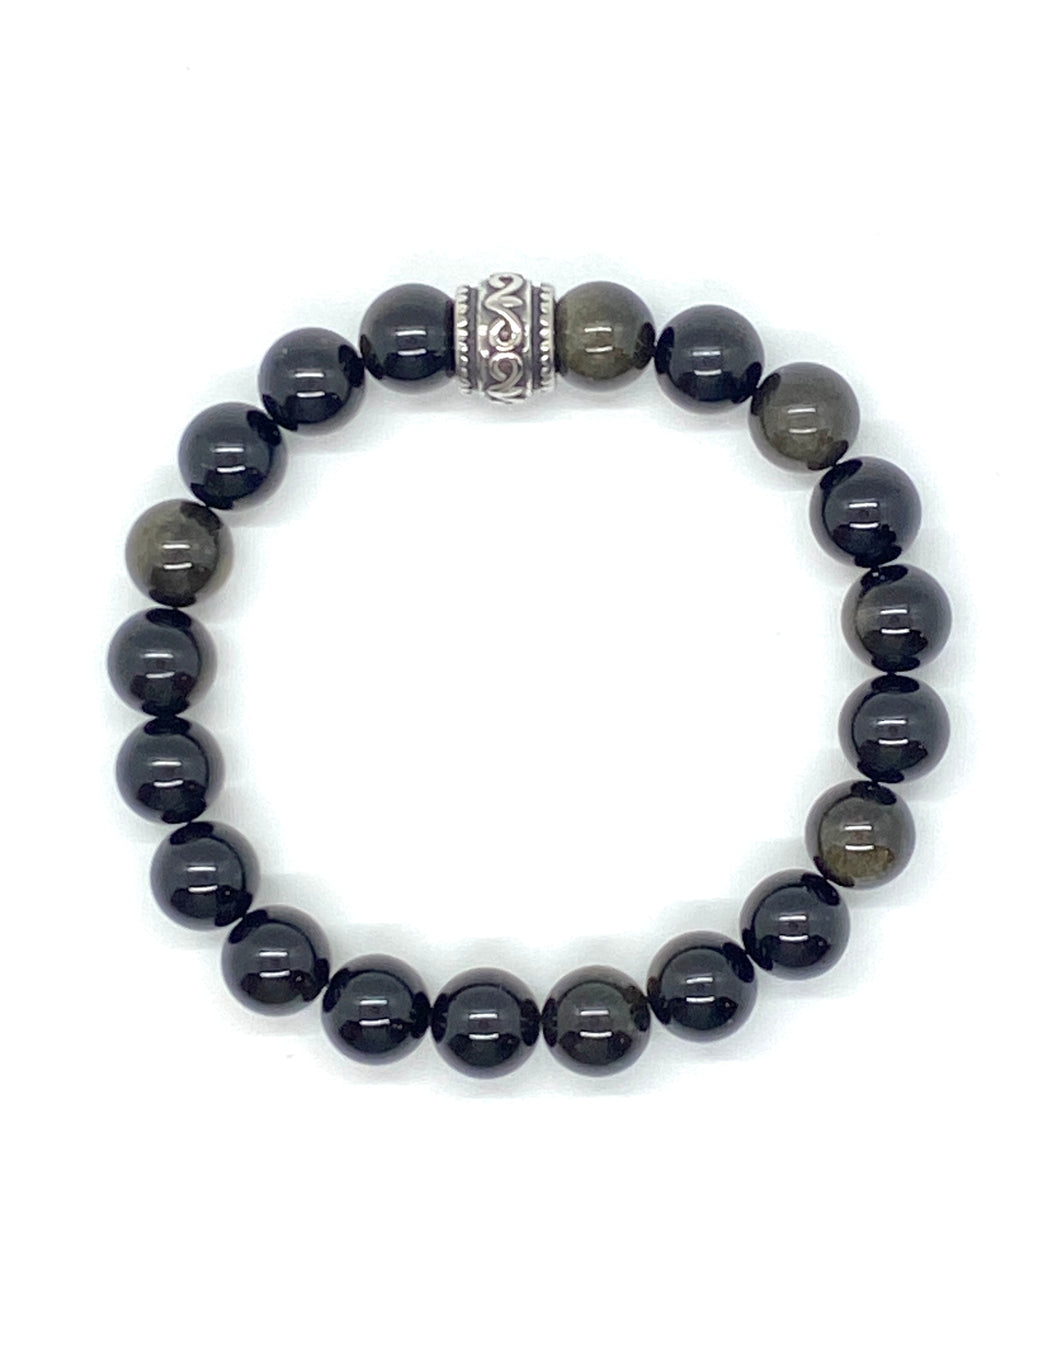 Silver Obsidian Gemstone bracelet with Stainless Steel Accent